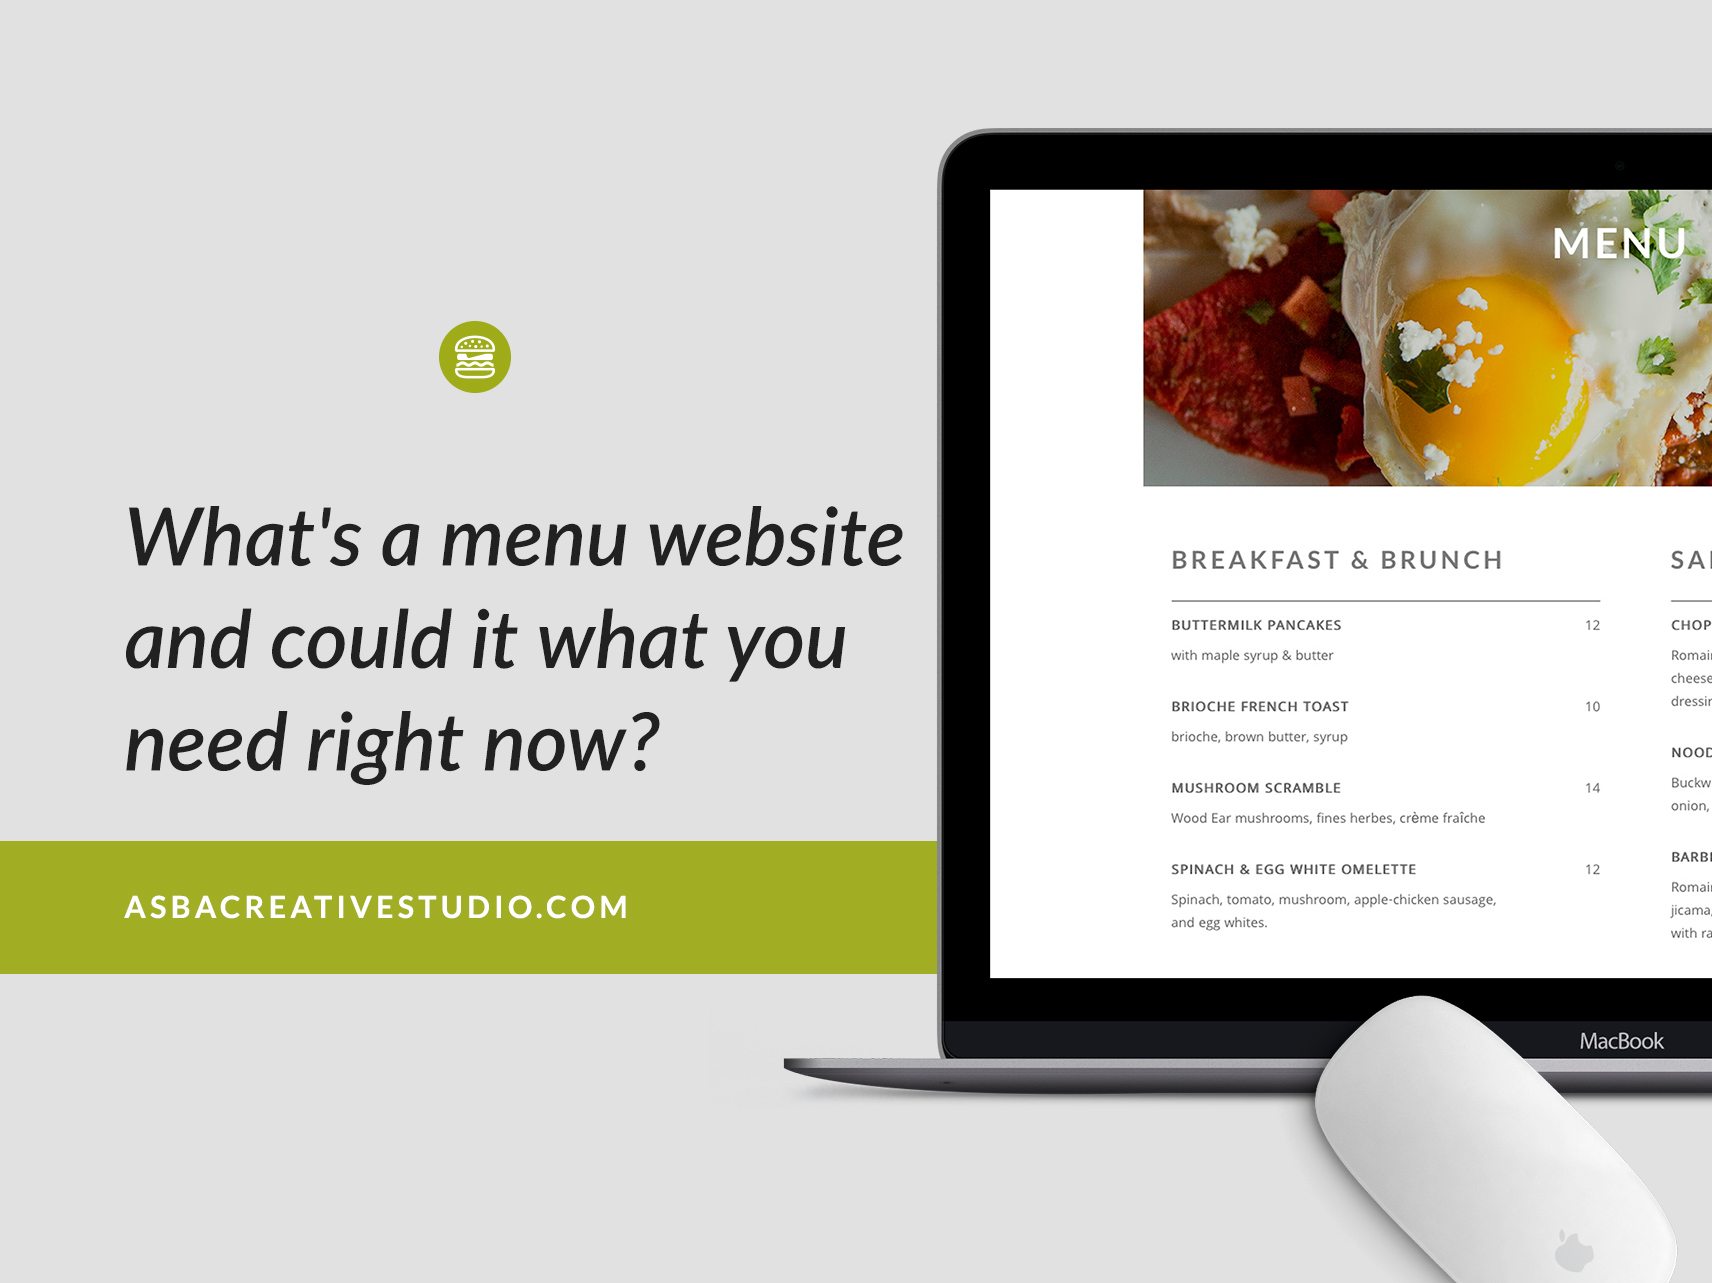 What’s a menu website and could it be what you need right now?